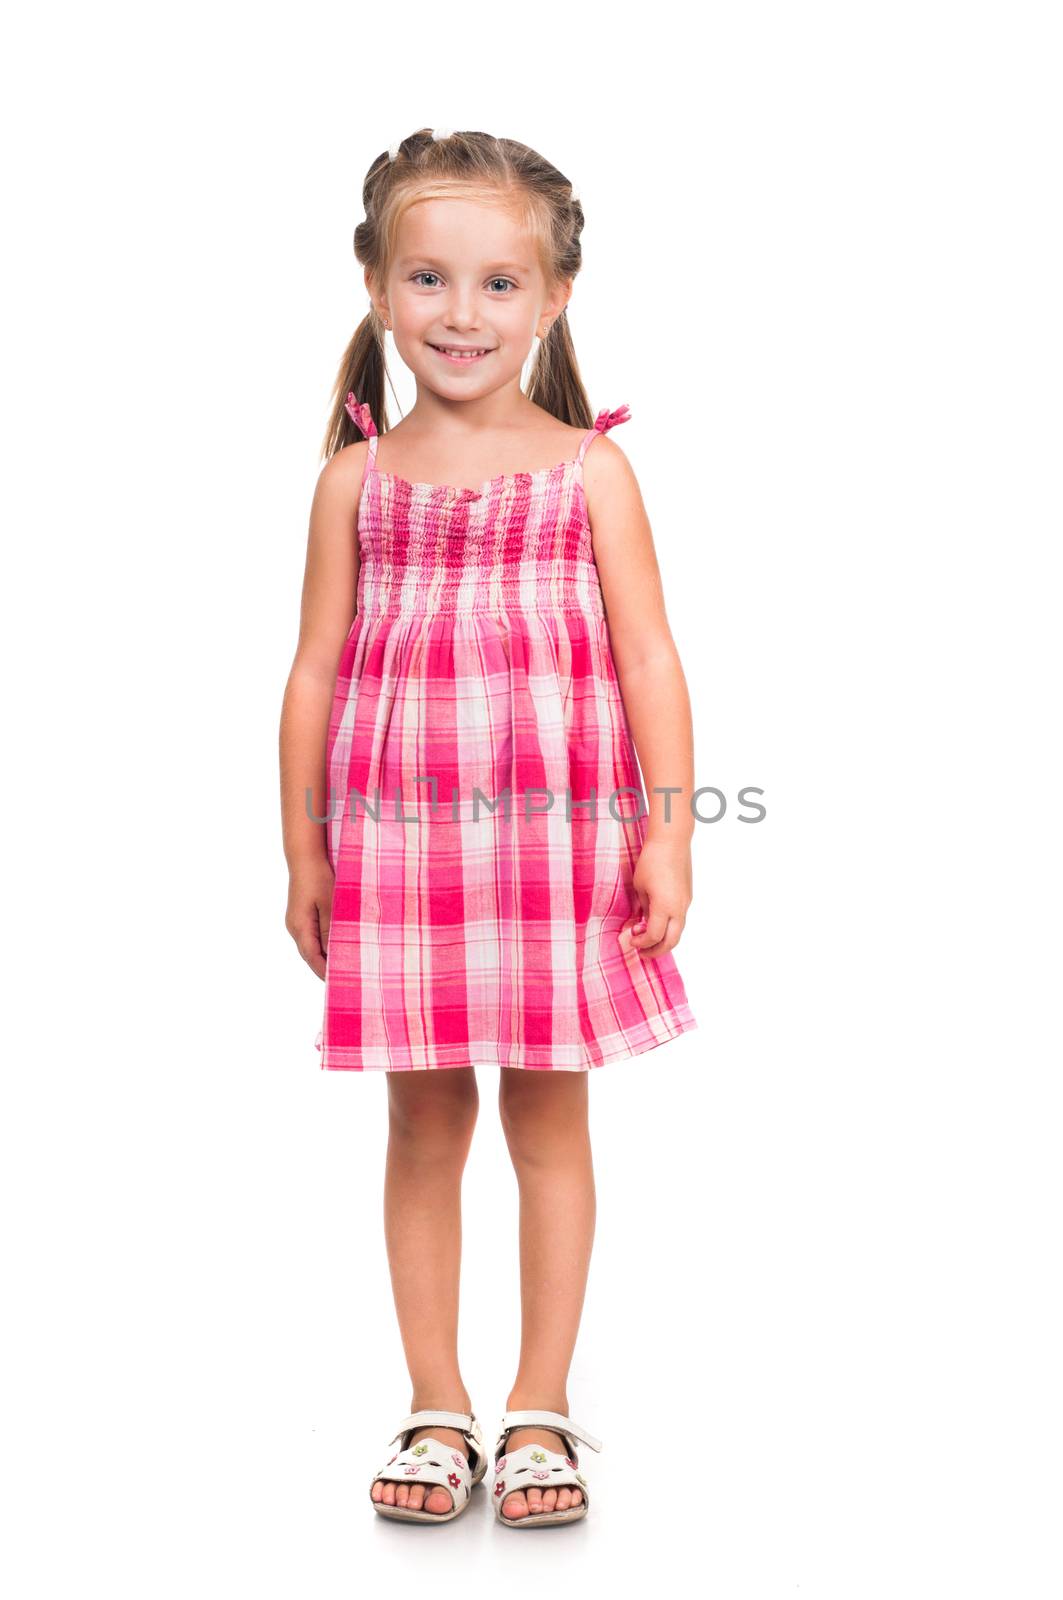 cute smiling little girl isolated on white background